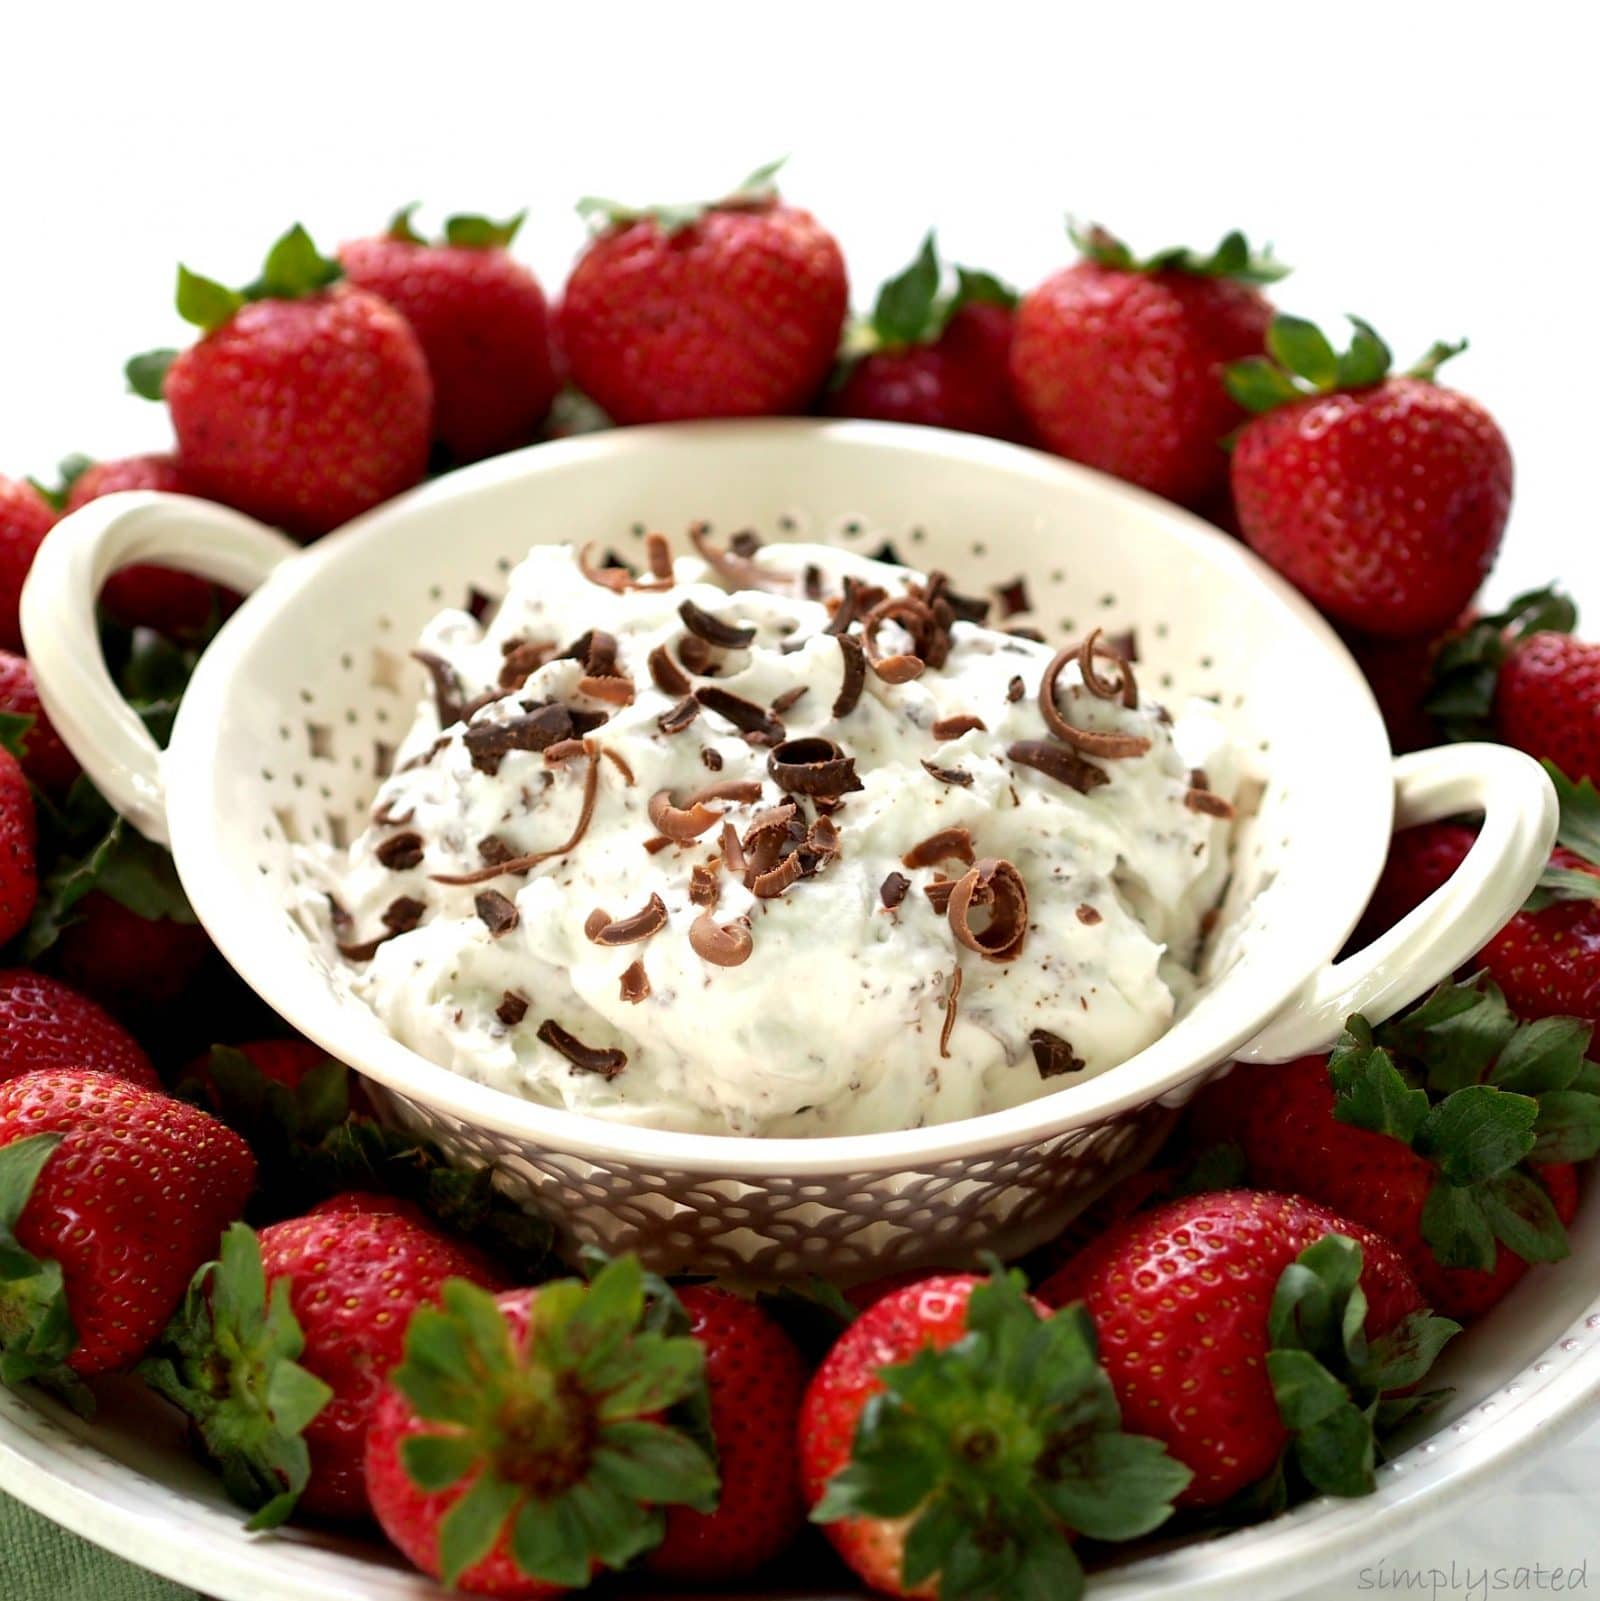 Strawberries & Cream with Chocolate is a beautiful and easy dessert or appetizer. simply sated